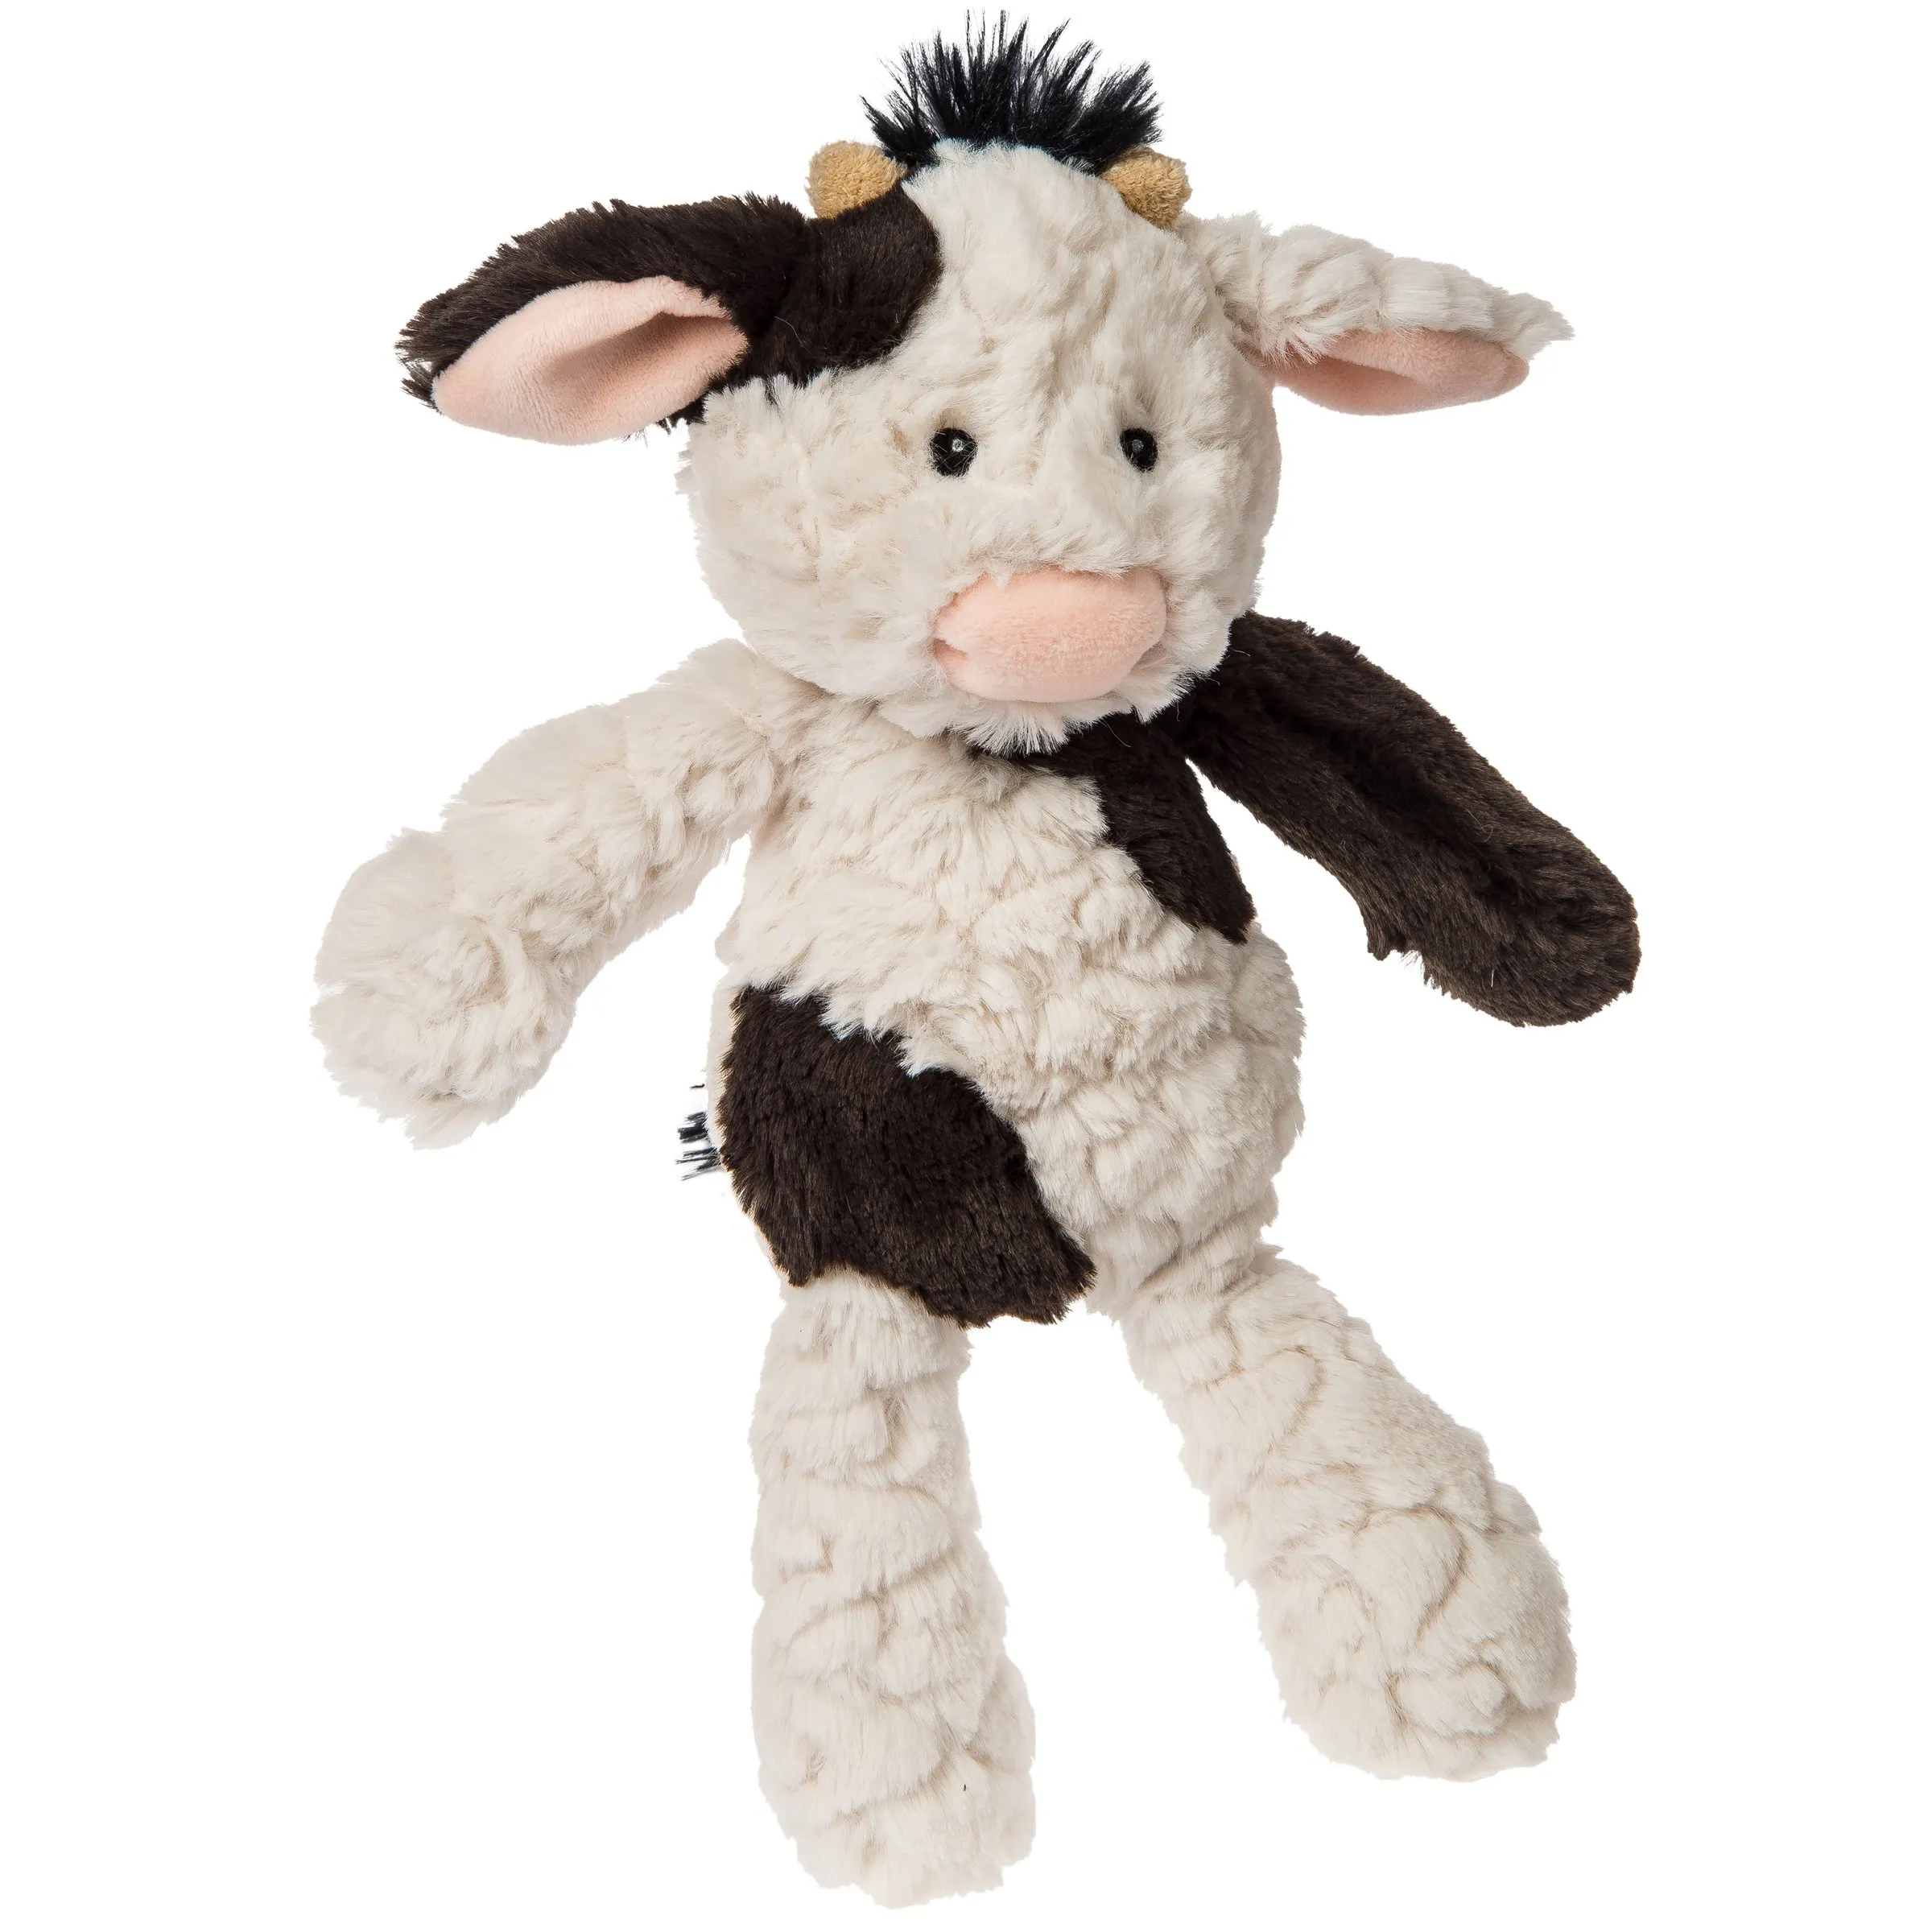 Mary Meyer Putty Nursery Soft Toy, Cow, 1 Count (Pack of 1)